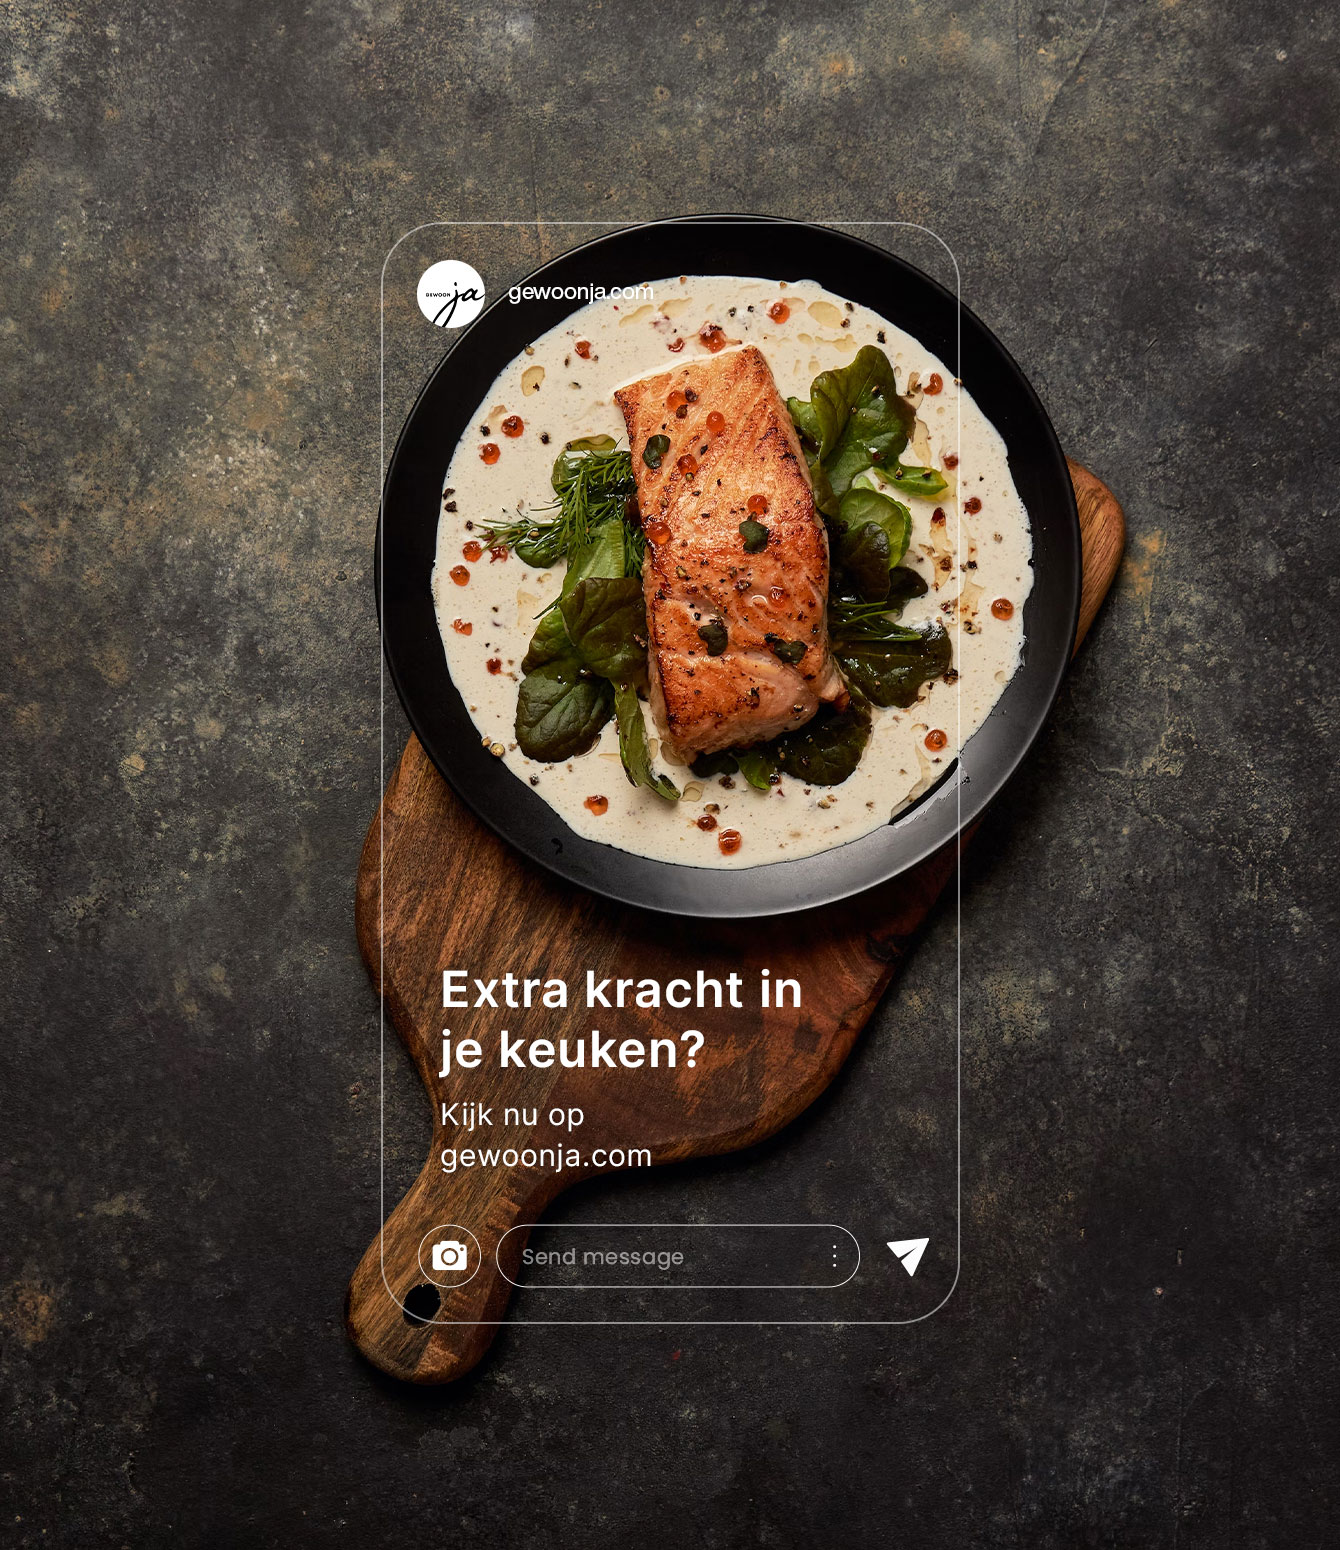 top view of plate of food with a iPhone screen mockup in the middle